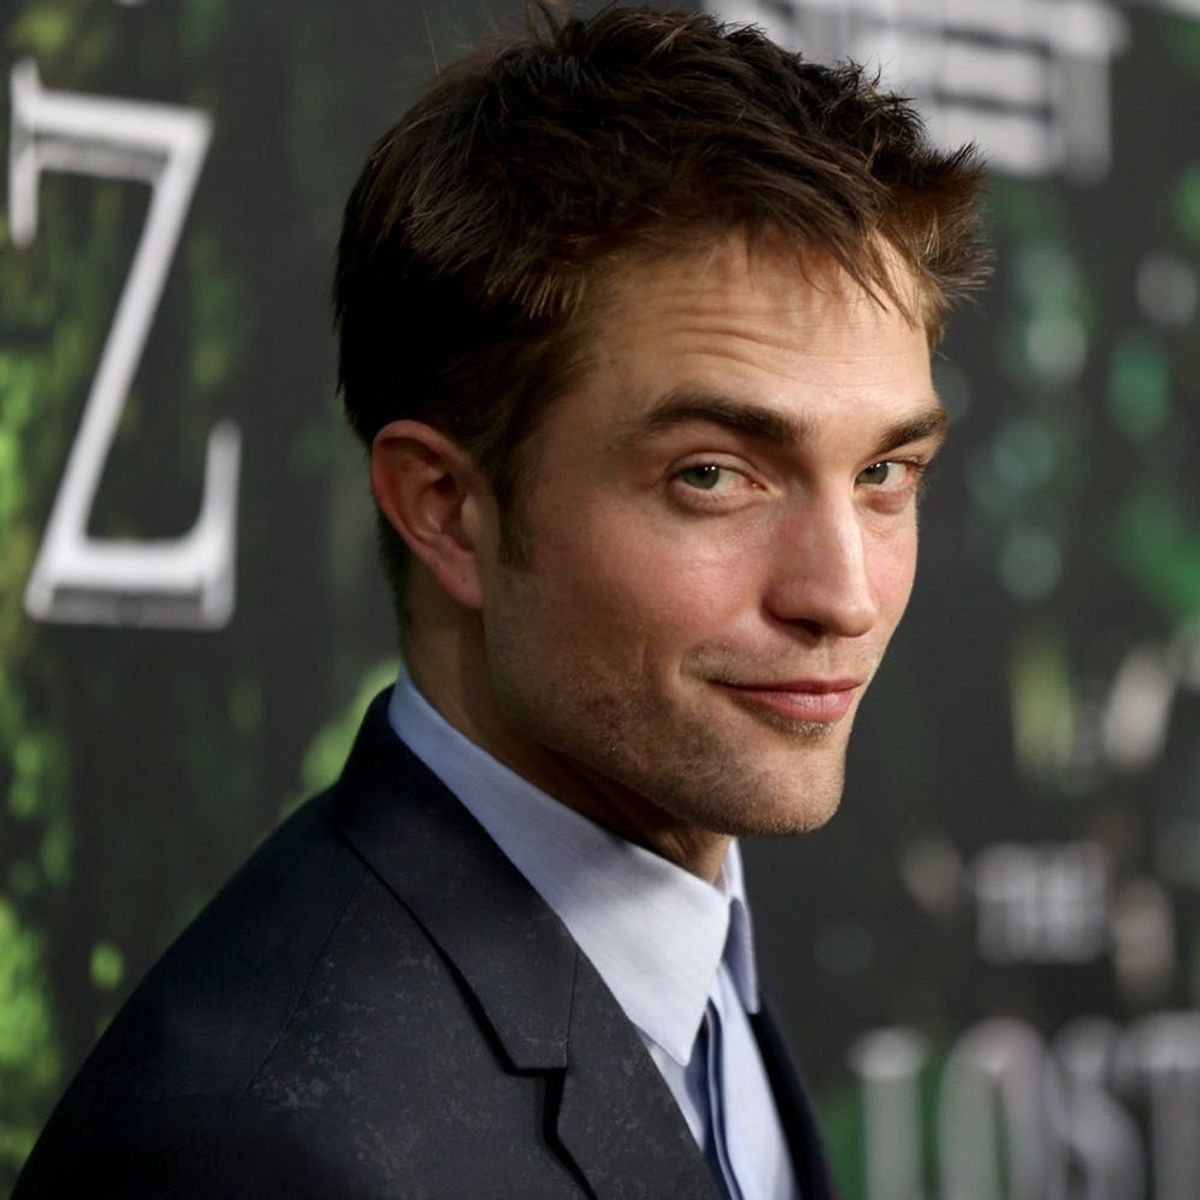 Robert Pattinson Accidentally Spent Fake Money from the Set of His Latest Movie